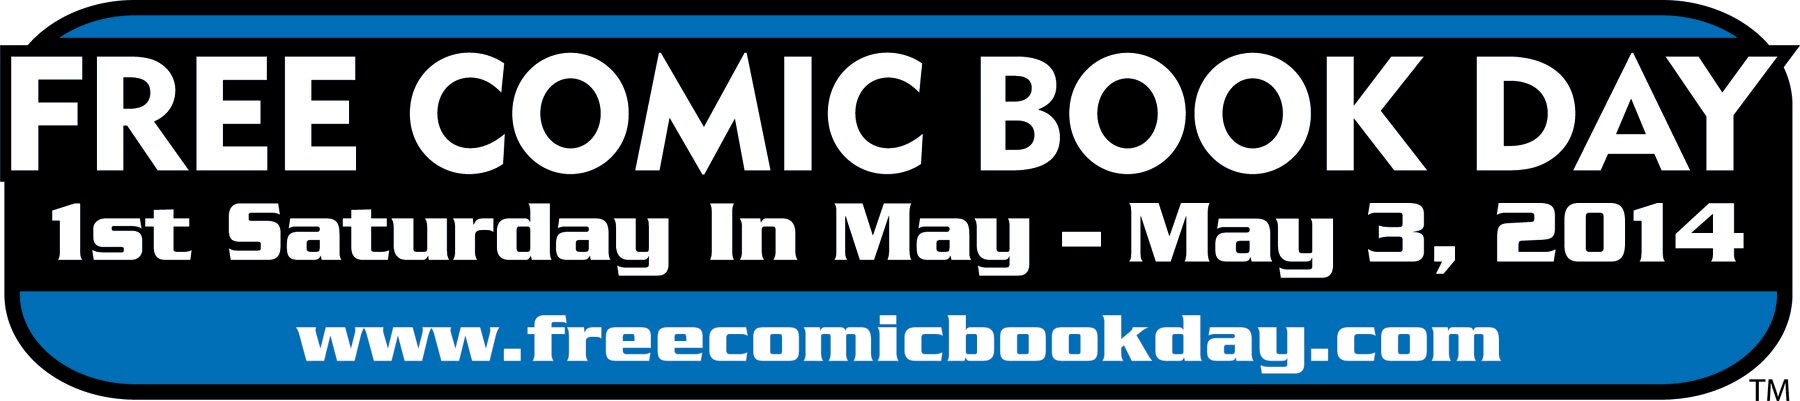 14 things to look out for during this year's Free Comic Book Day ...